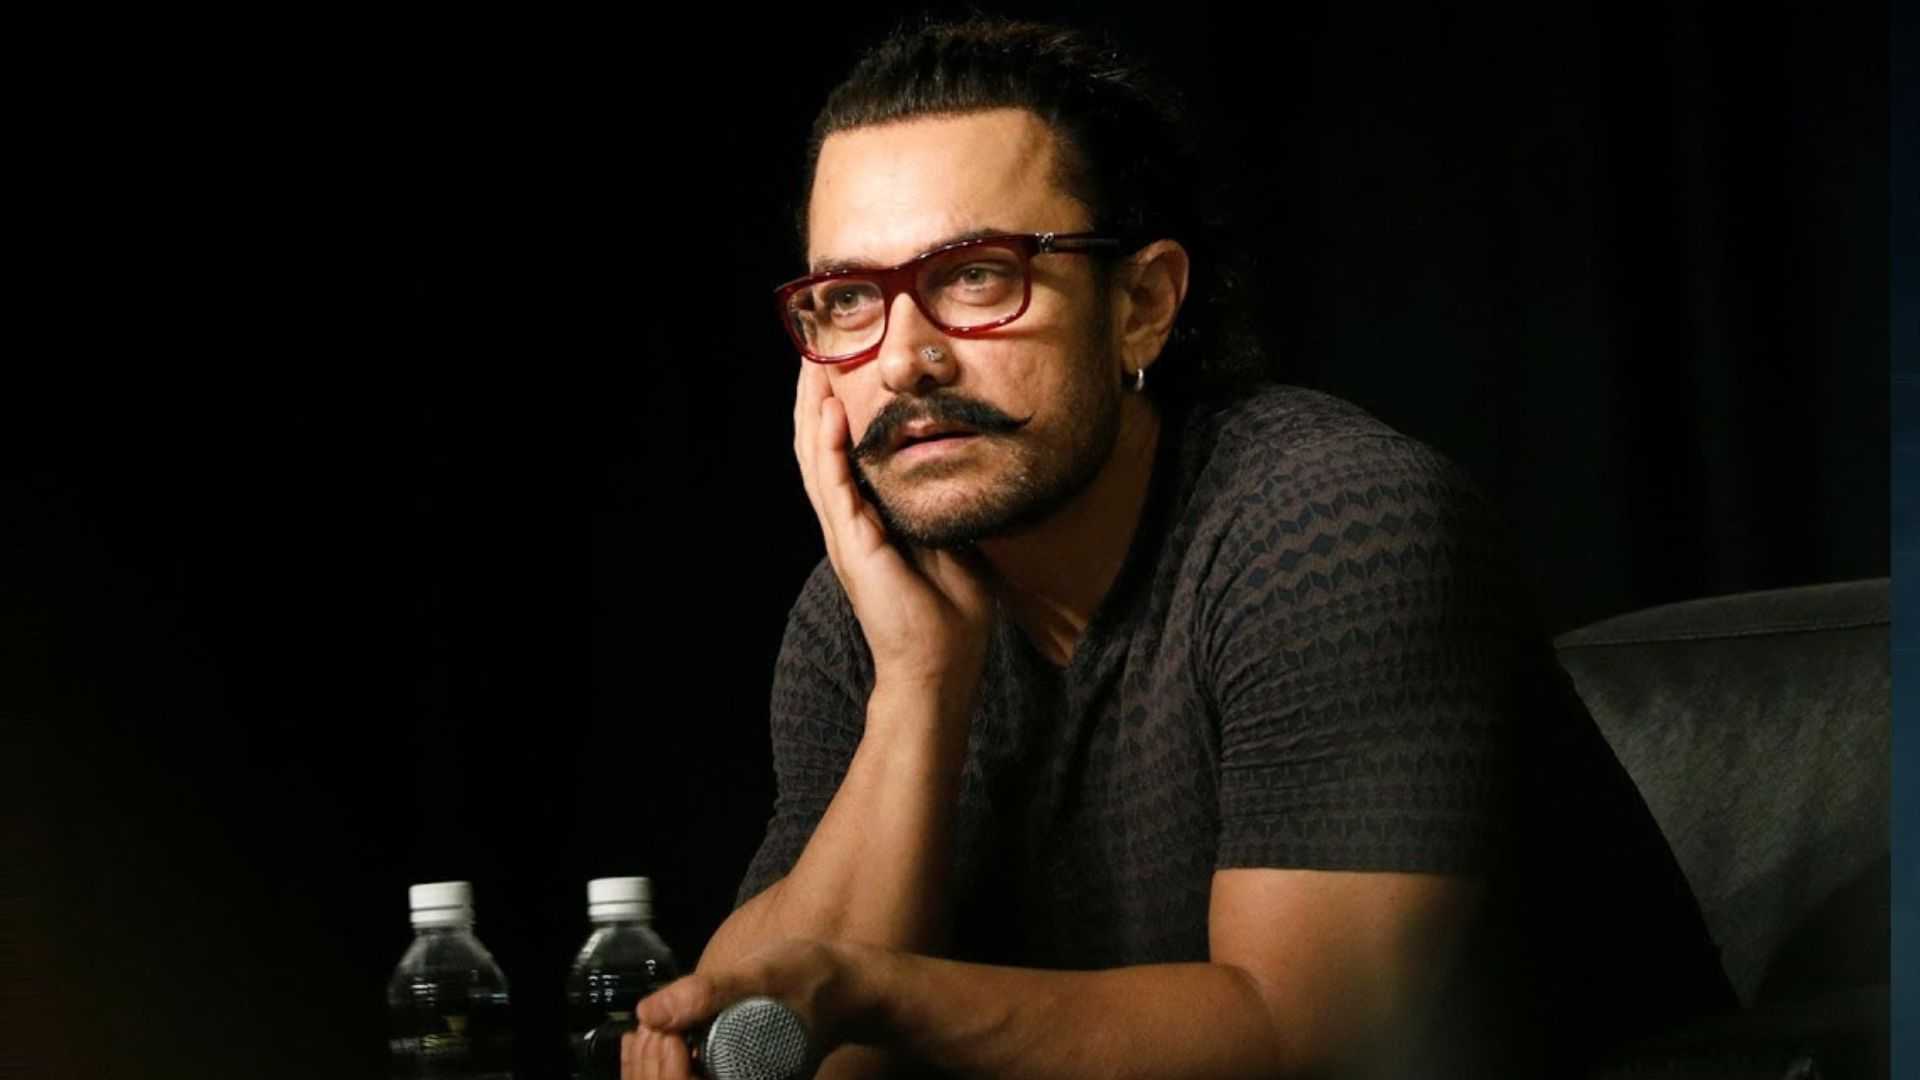 Aamir Khan took method acting to another level for the drunk scene in 3 Idiots, reveals co-star R Madhavan